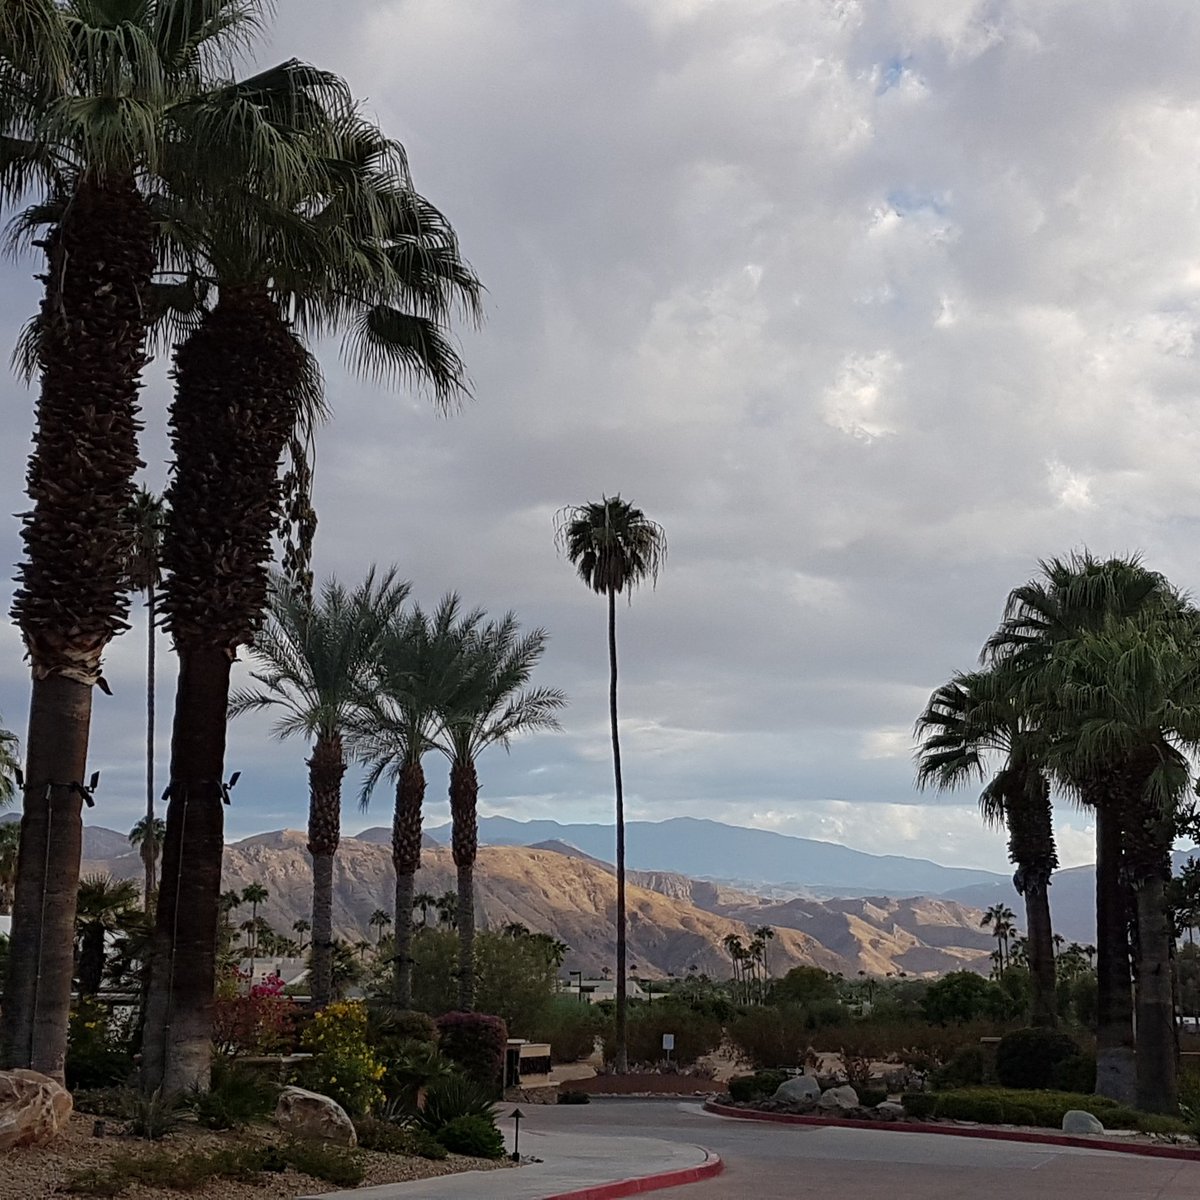 See ya later #PalmSprings it's been a slice. Thanks for putting on a great conference @URISA and @CalGIS #GISPro #CalGIS #postconferenceblues